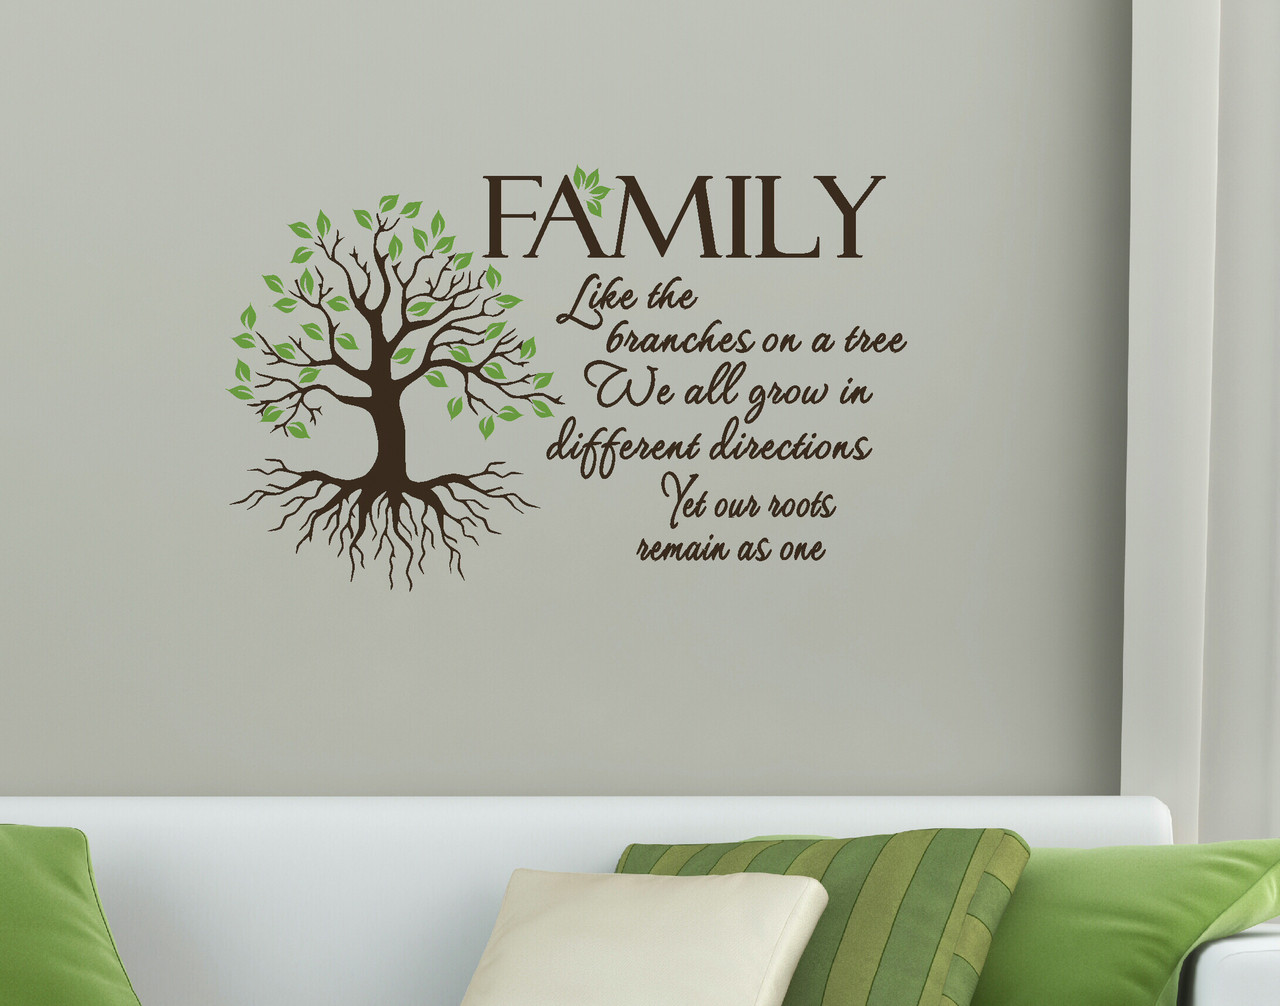  Family  Quote  Like Branches on a Tree  Wall Art Vinyl Decal